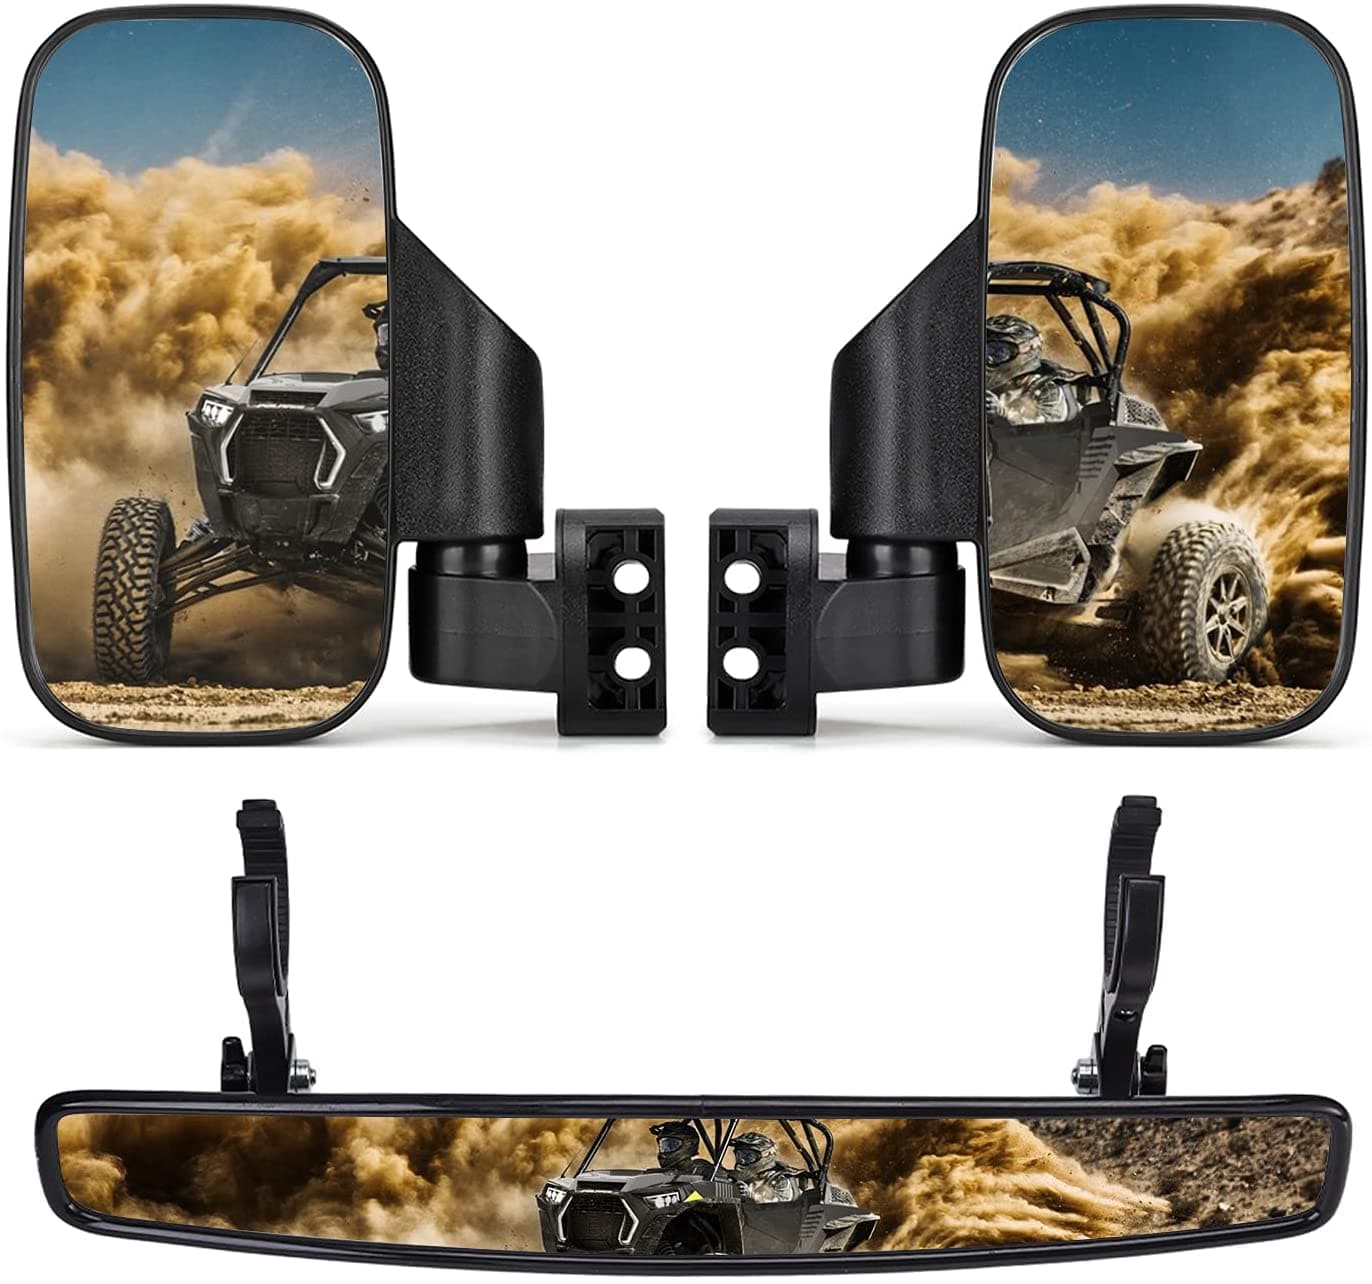 Side Mirrors And Rear Mirror with 1.75